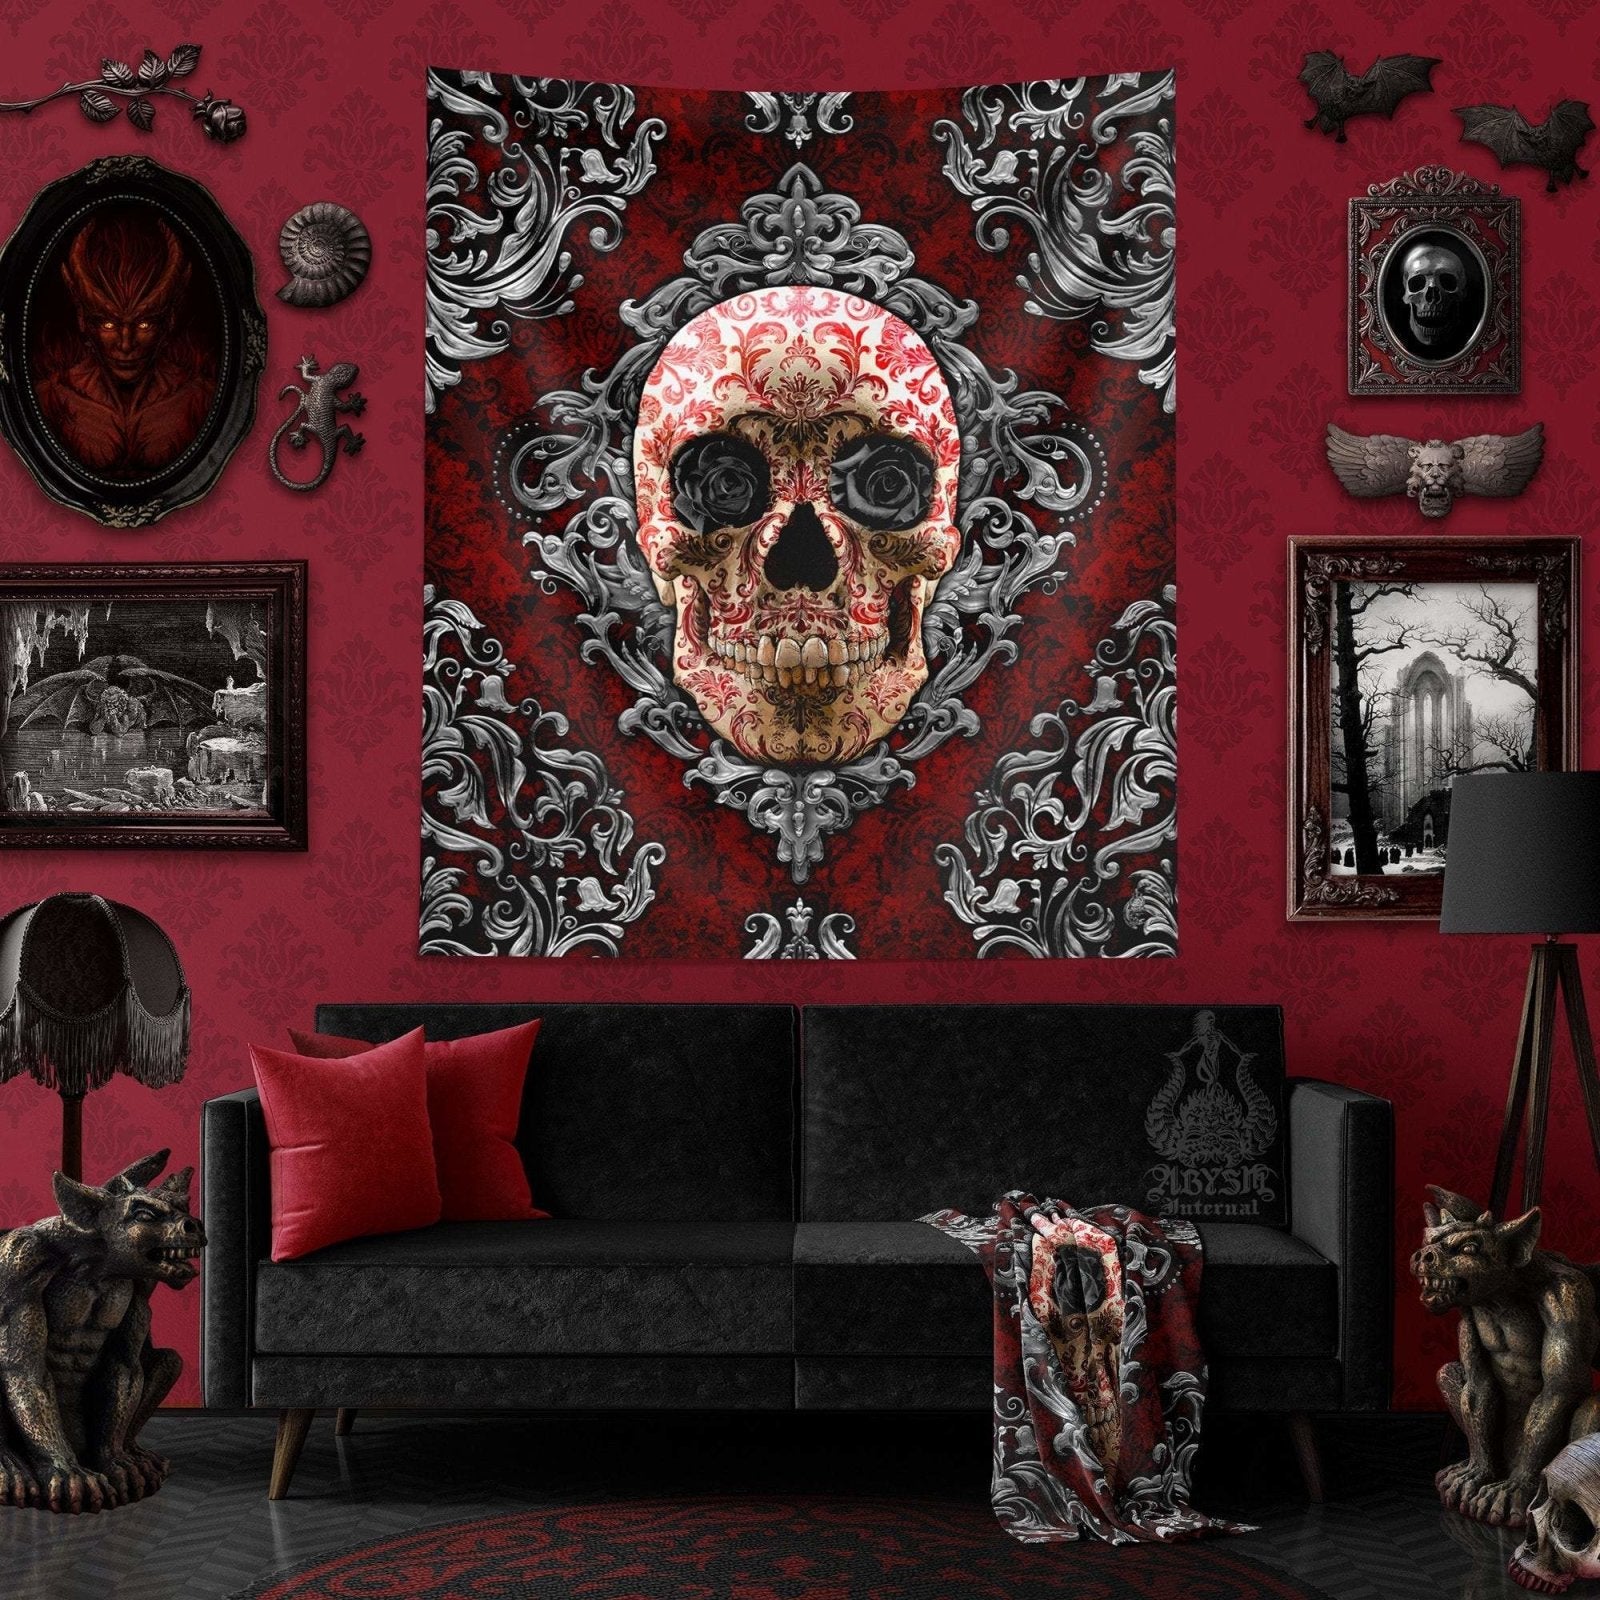 Gothic Tapestry, Skull Wall Hanging, Macabre Home Decor, Art Print - Goth & Black Roses - Abysm Internal